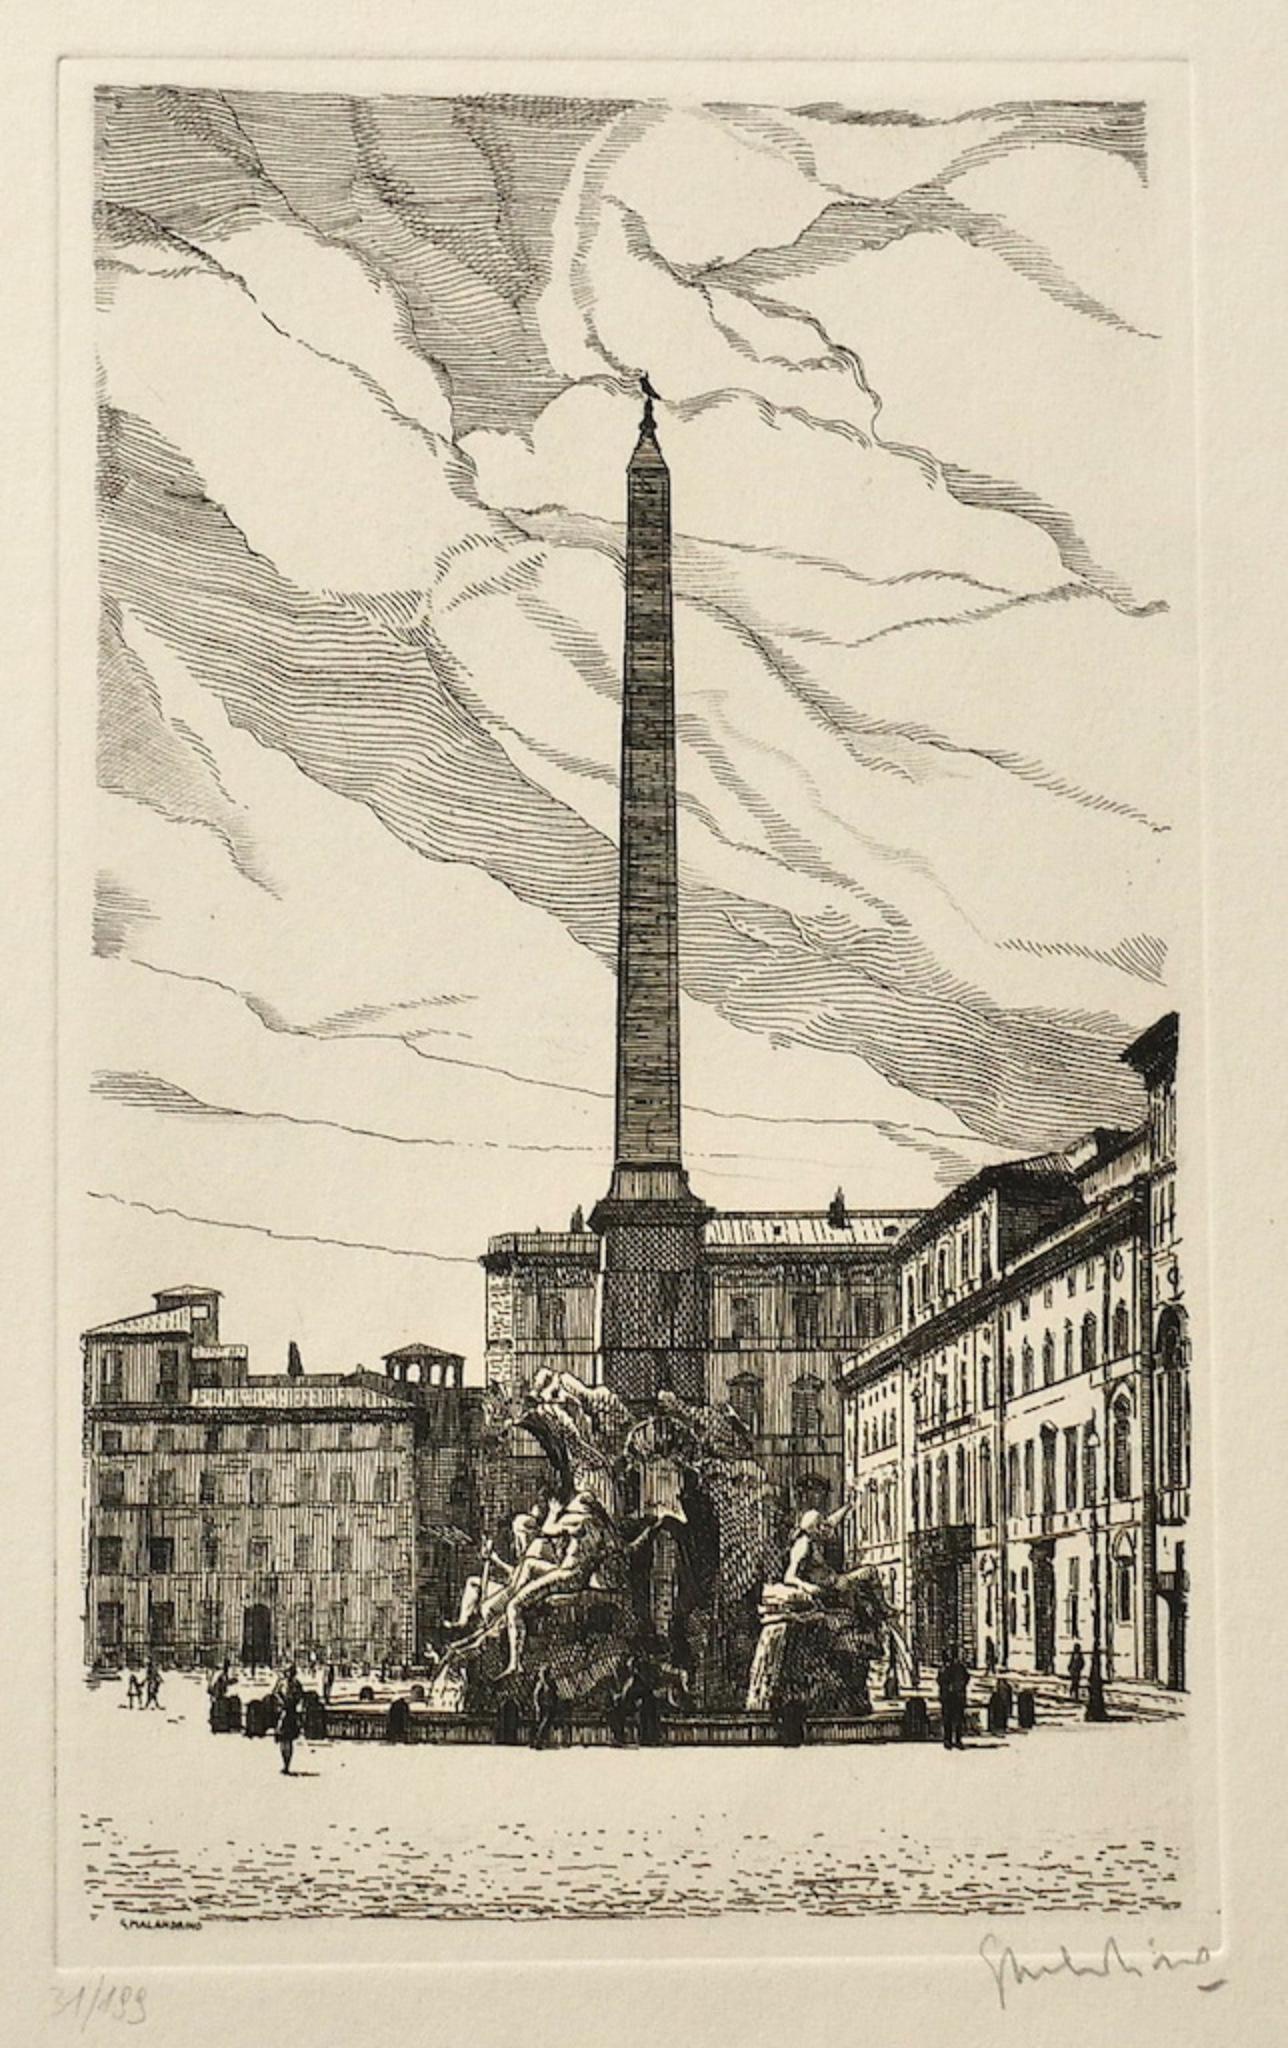 Navona Square - Rome is an original artwork realized by Giuseppe Malandrino.

Original print in etching technique.

Hand-signed by the artist in pencil on the lower right corner. Numbered on the lower-left corner. Edition 31/199.

Good conditions.